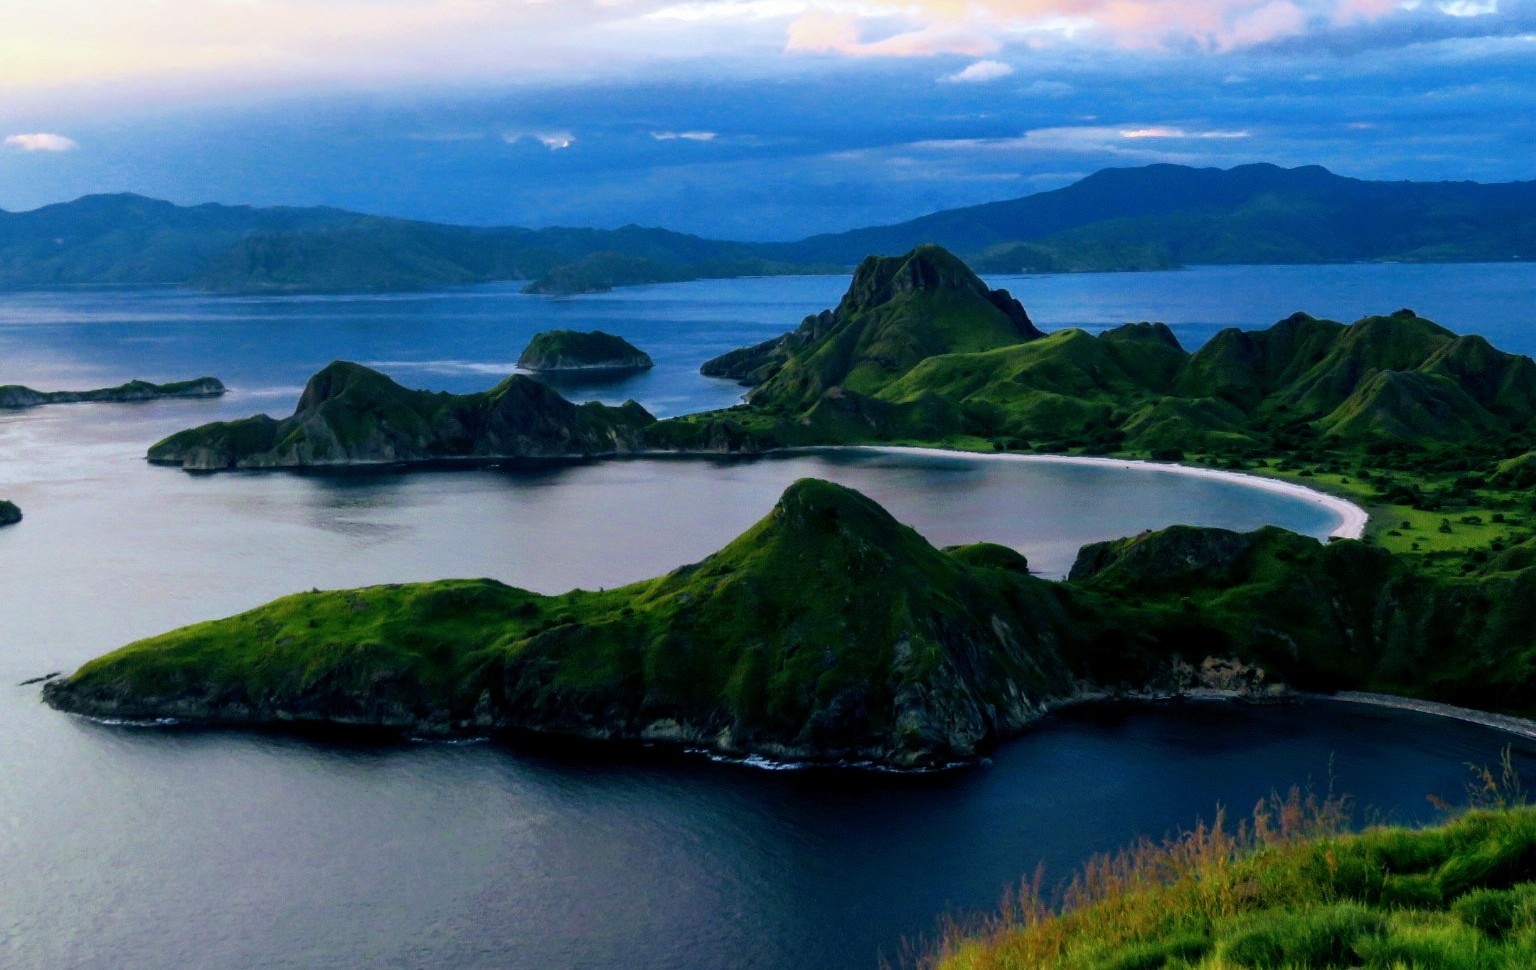 Day 16 – Sunsets in Komodo National Park